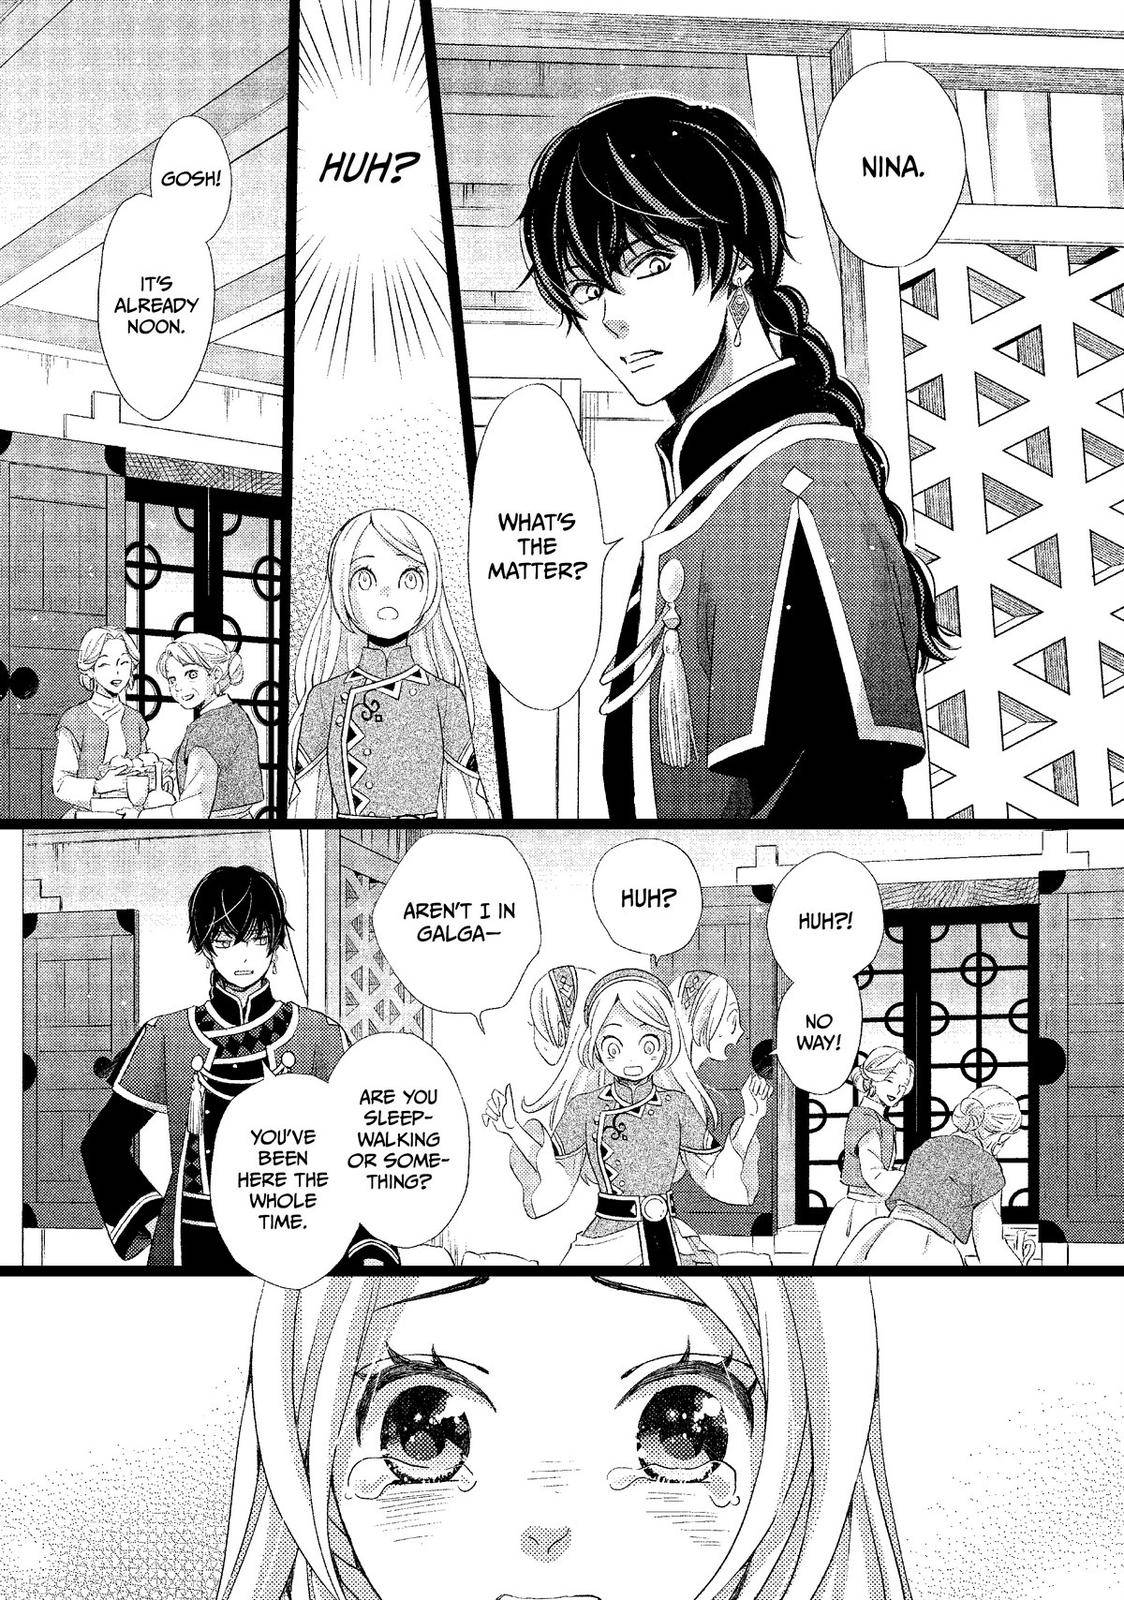 Nina the Starry Bride - chapter 10 - #5